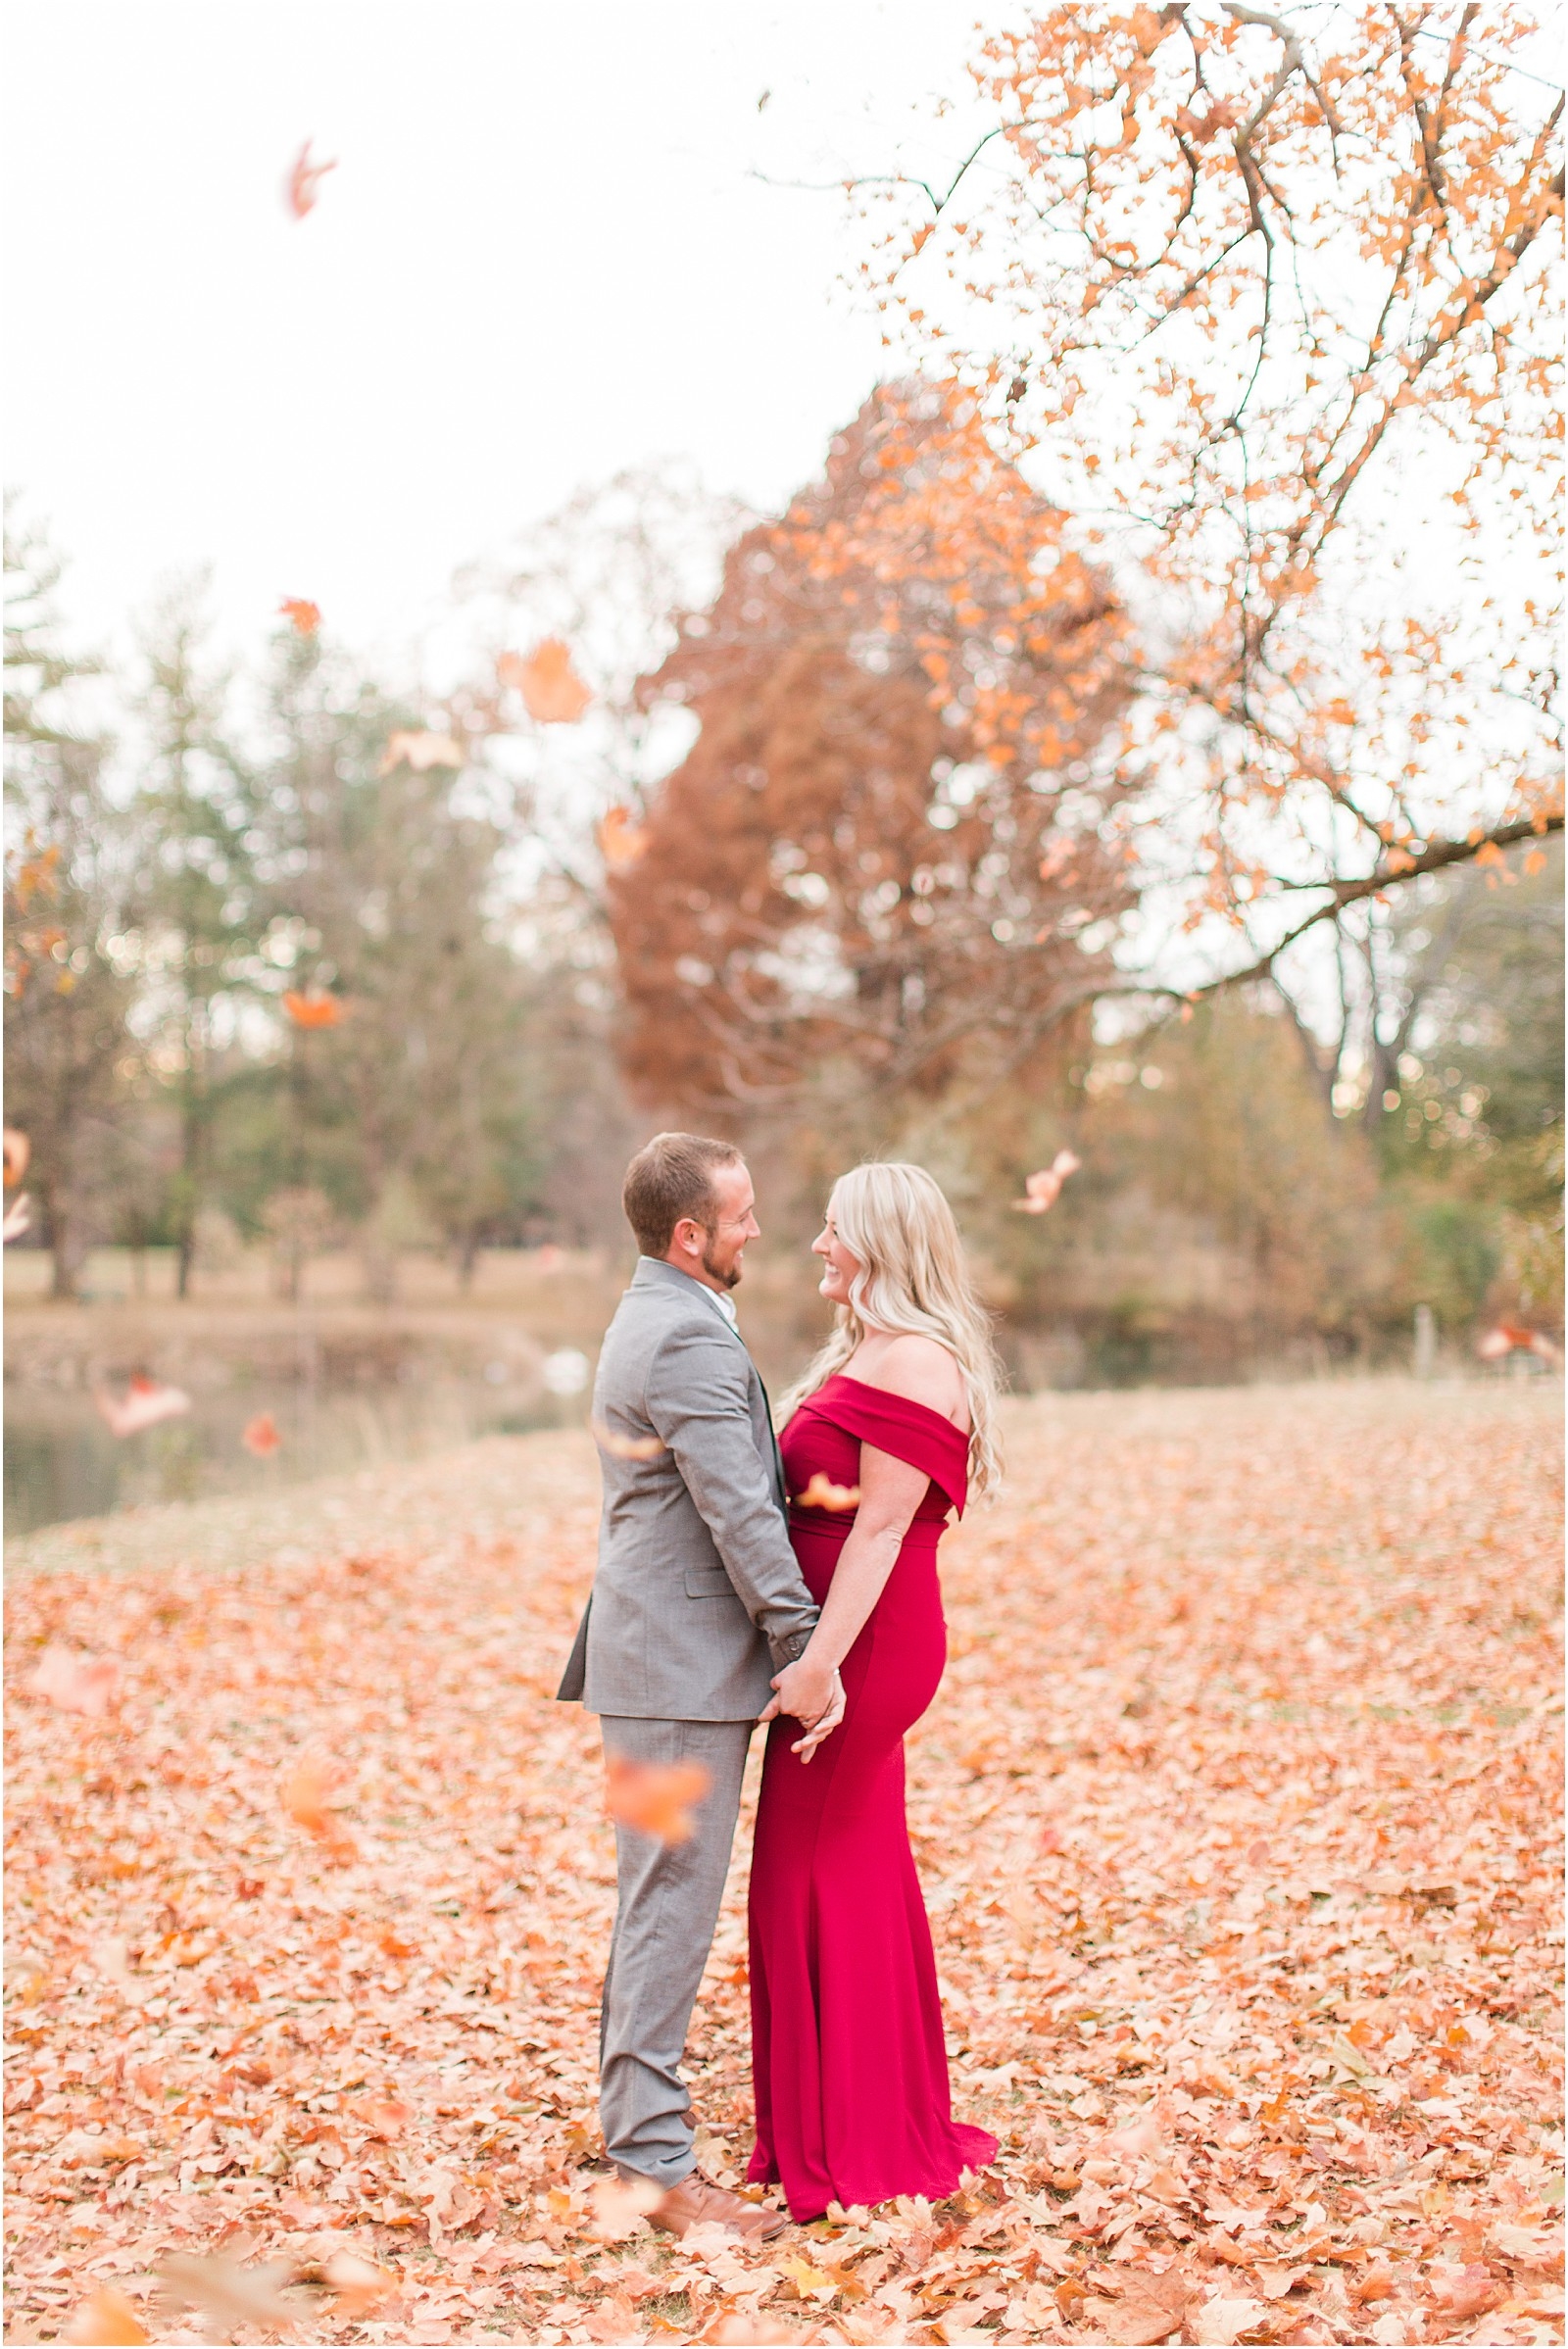 A Perfect Fall Engagement Session at Evansville State Park | Jamie and Max | Bret and Brandie Photography 033.jpg